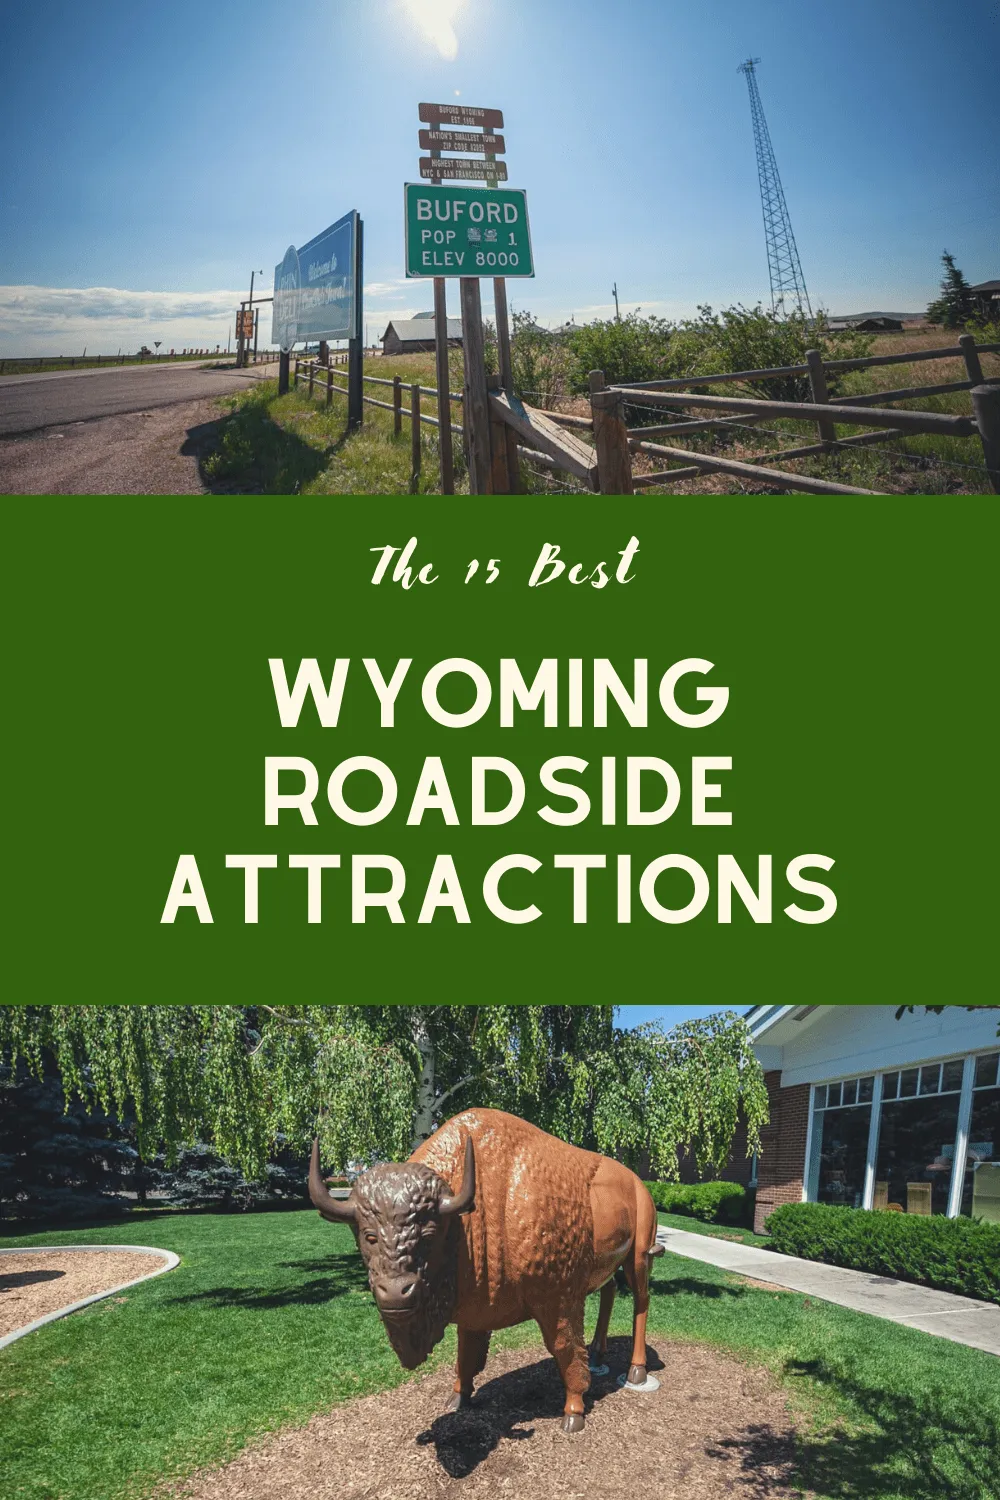 The best Wyoming roadside attractions to visit on a Wyoming road trip. Add these roadside oddities to your travel bucket list, itinerary, or route map! Fun road trip stops for kids or adults. #WyomingRoadsideAttractions #WyomingRoadsideAttraction #RoadsideAttractions #RoadsideAttraction #RoadTrip #WyomingRoadTrip #WyomingRoadTripMap #WyomingRoadTripMap #WyomingRoadTripWithKids #WyomingTravelRoadTrips